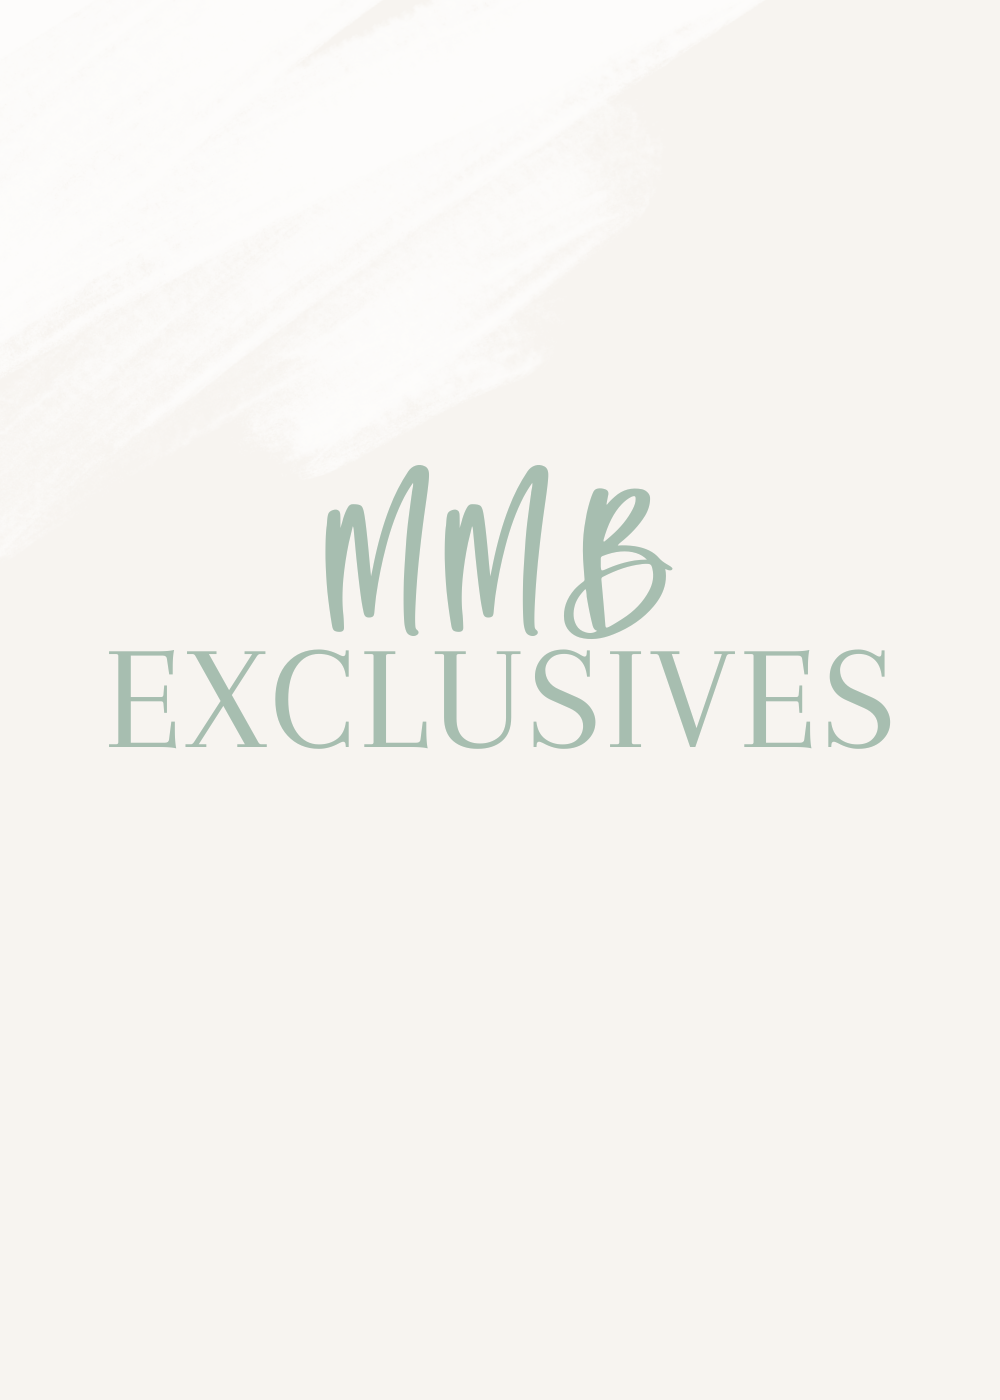 MMB Exclusives